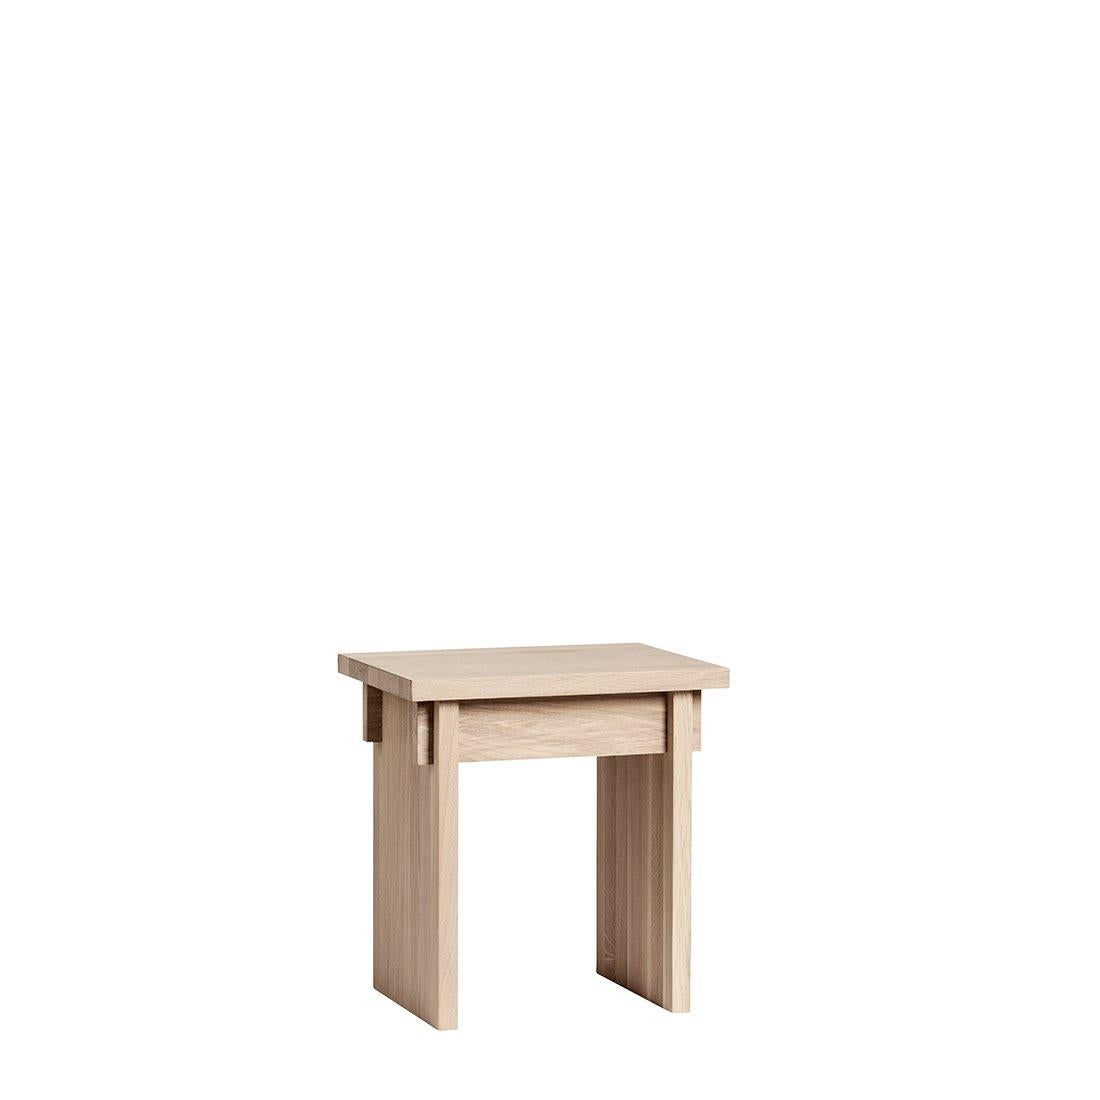 Japanese dining chair by Kristina Dam Studio
Materials: Solid oak with oil treatment, 
Dimensions: 30 x 40 x H 42cm.

Our Japanese dining stool is a modern and stylish dining chair which is carefully crafted down to the very smallest detail. The